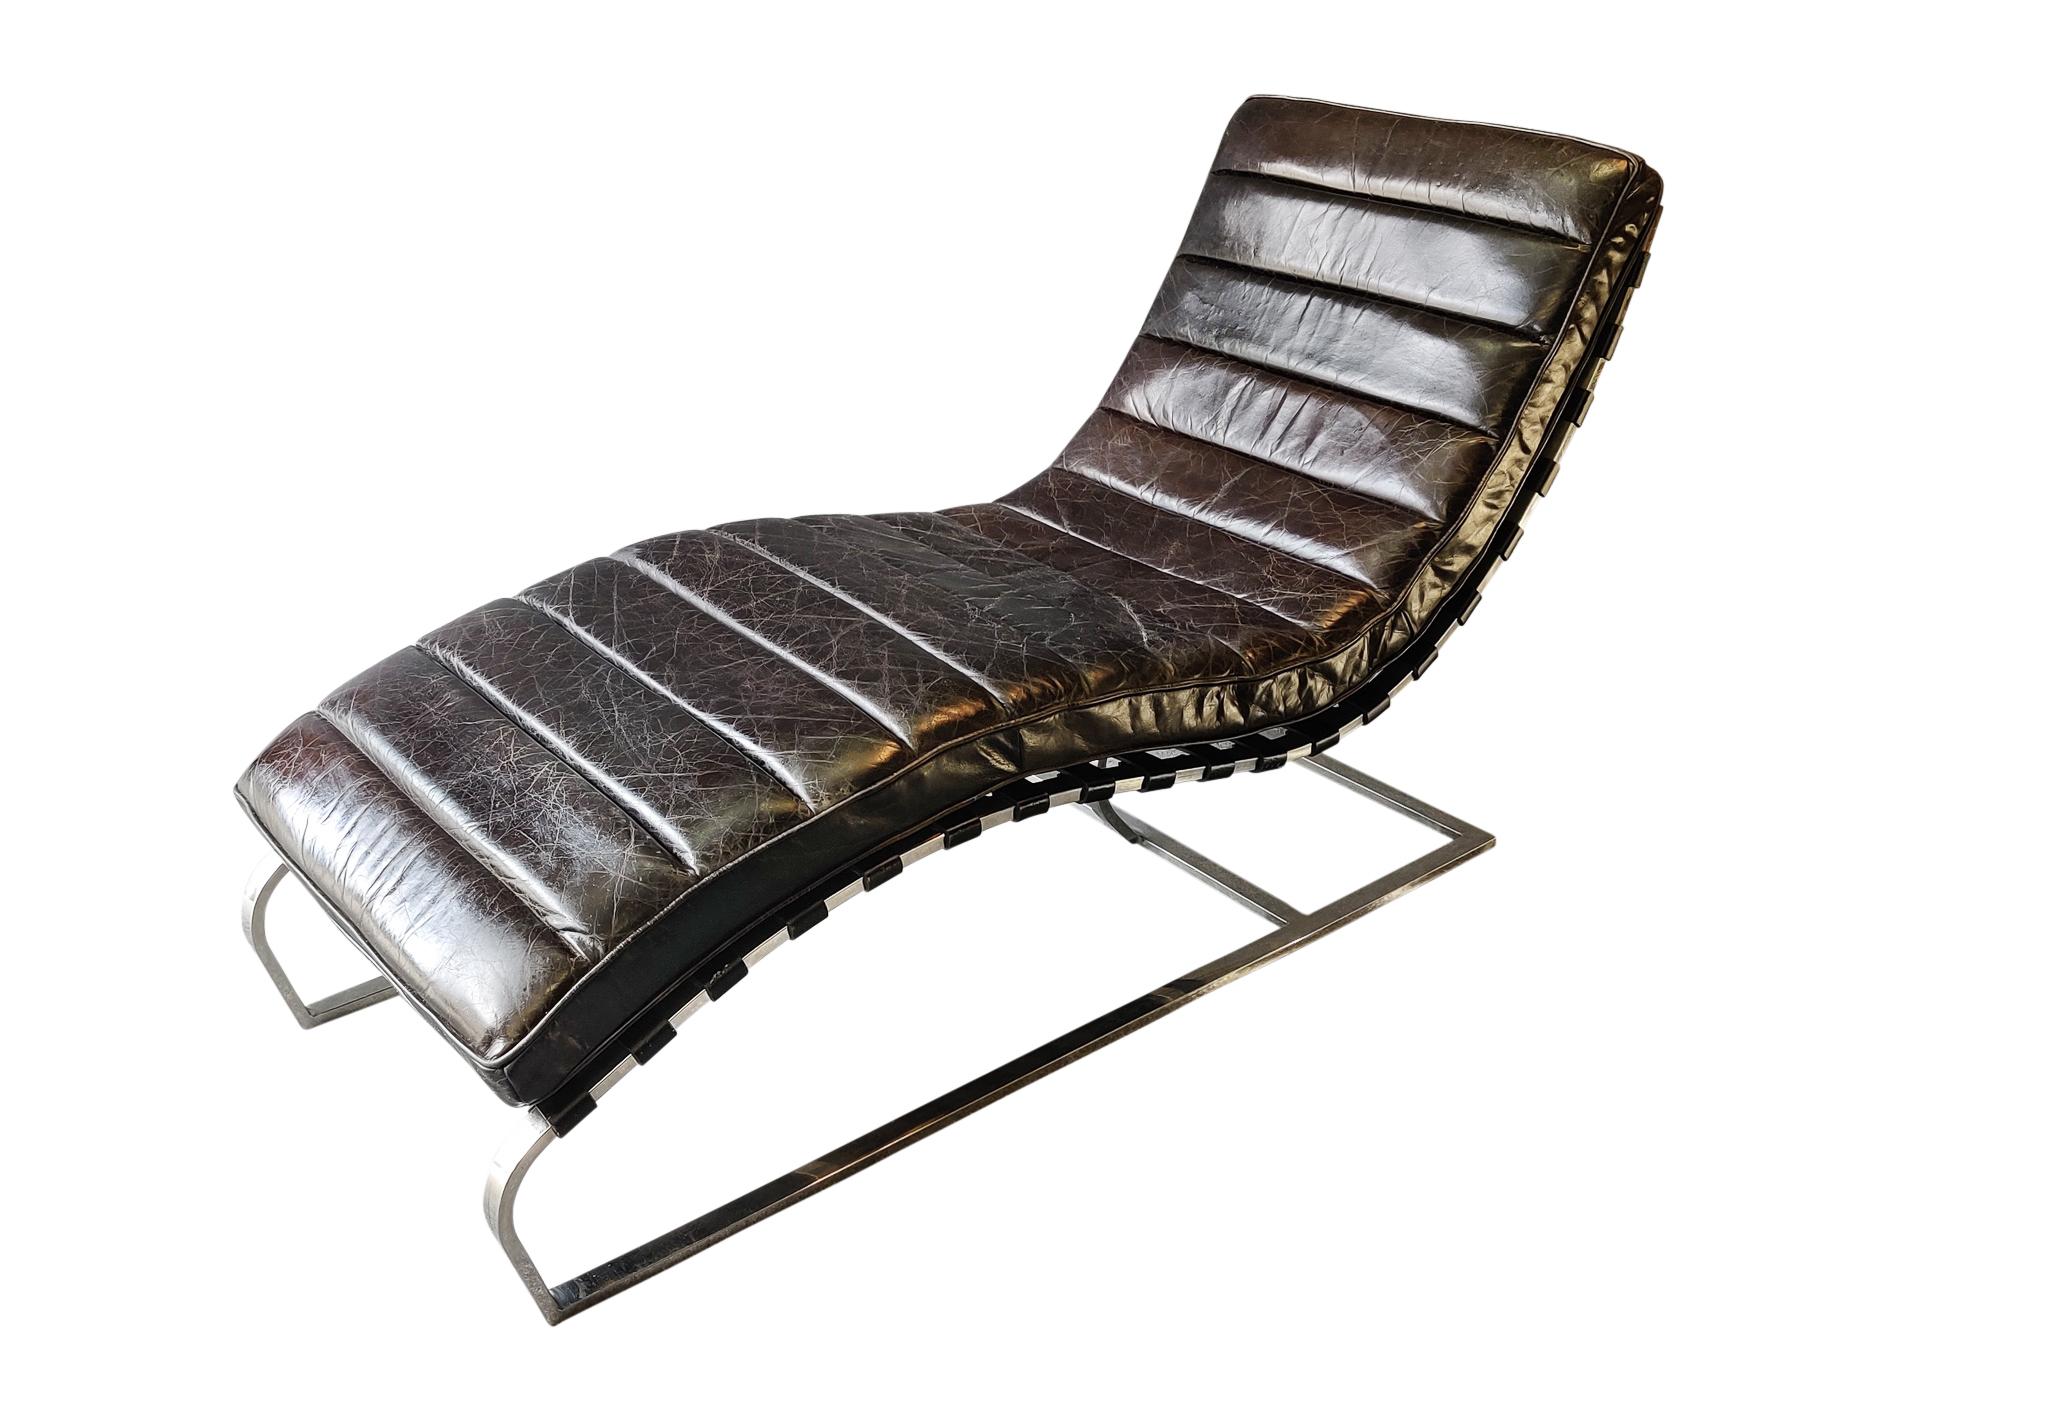 Inspired by a classic 1960s midcentury silhouette, this chair's graceful curves hug the body for optimal comfort. Constructed with heavy chromed steel and quality stitched leather, this chaise is sturdy, comfortable, and quite attractive. In